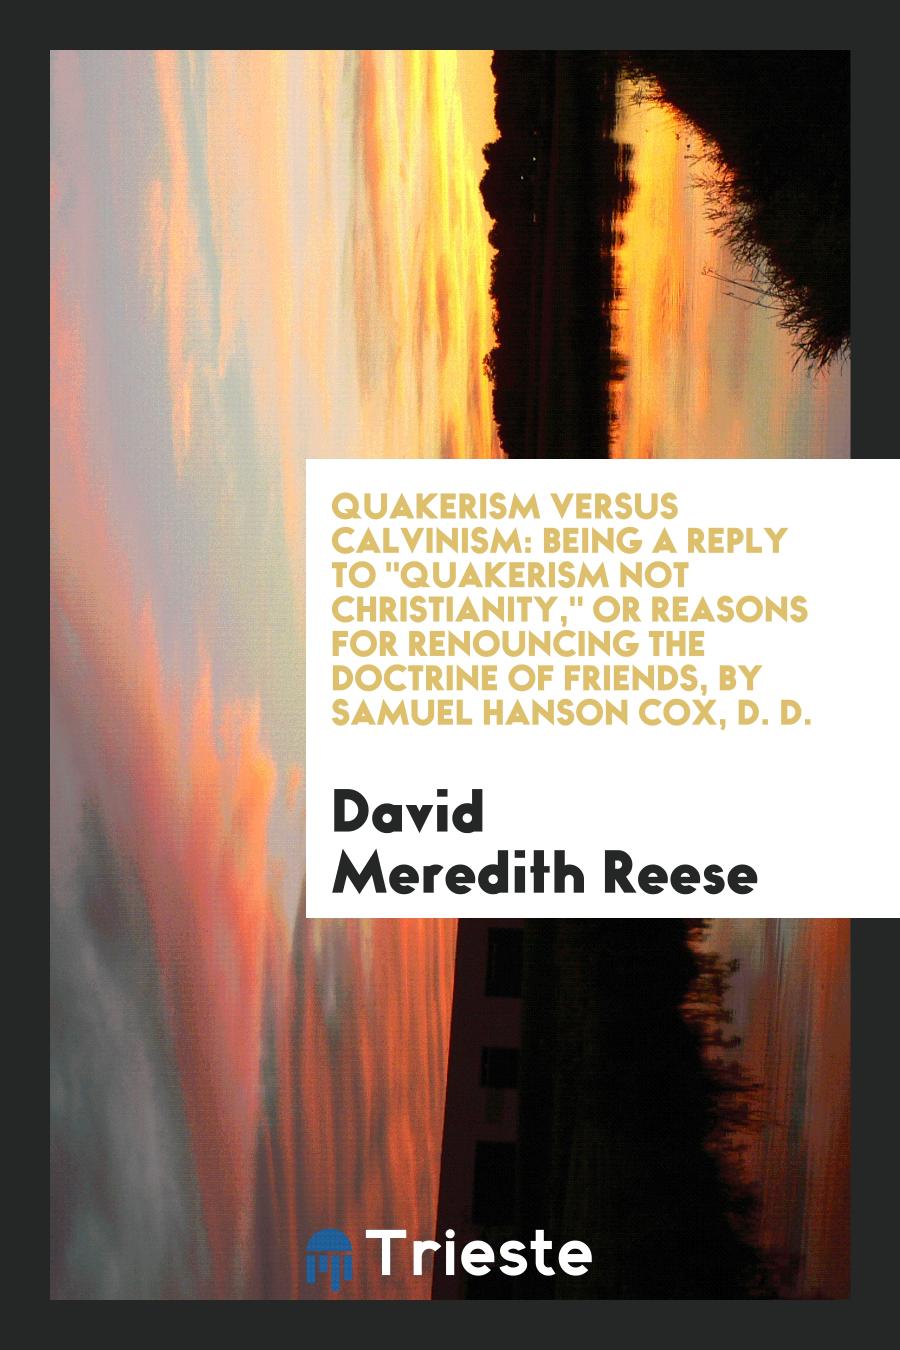 Quakerism versus Calvinism: Being a Reply To "Quakerism Not Christianity," or Reasons for Renouncing the Doctrine of Friends, by Samuel Hanson Cox, D. D.